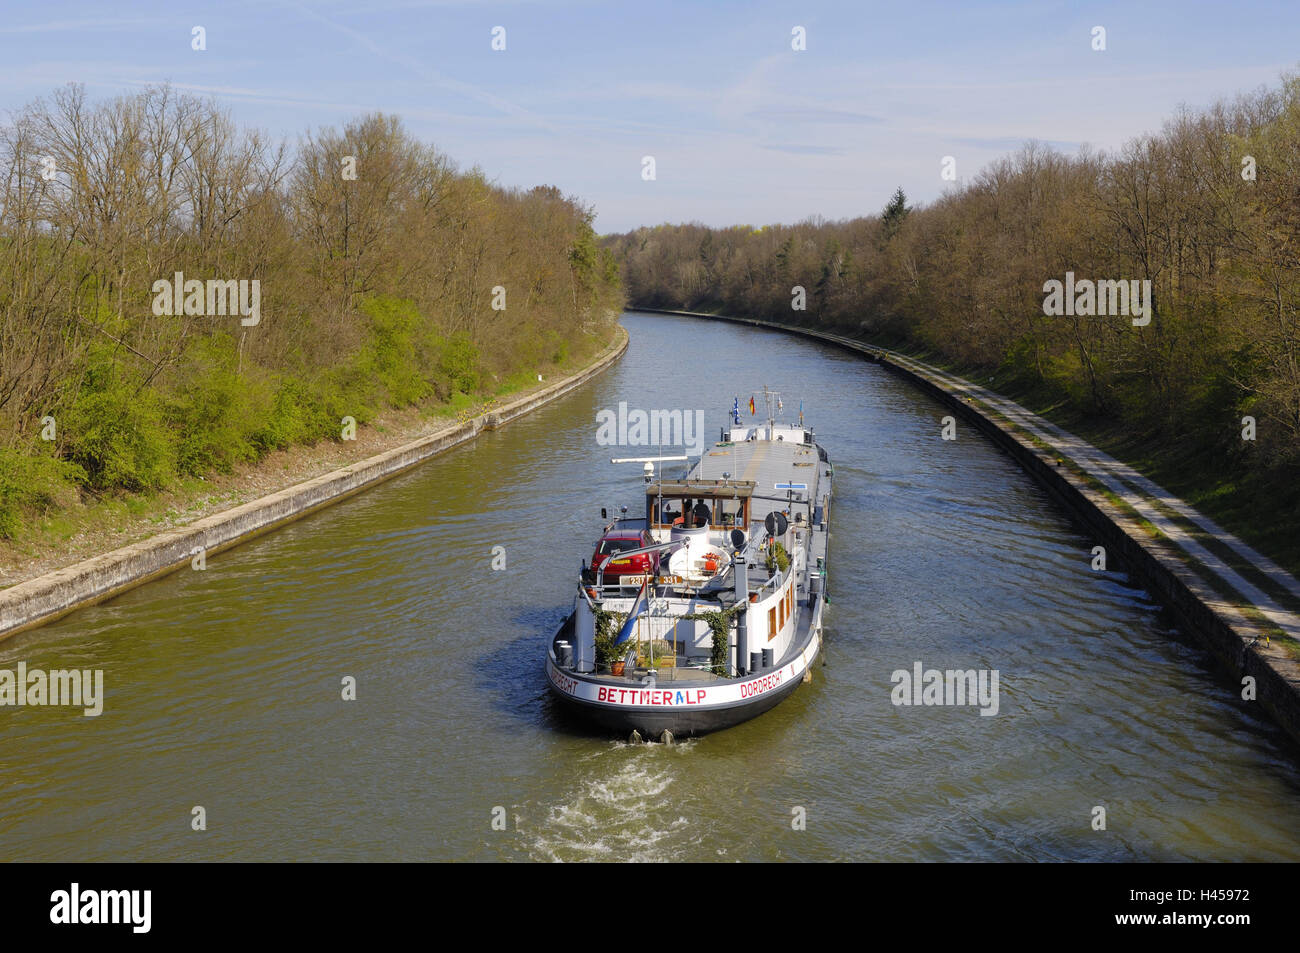 Germany, Bavaria, Lower Franconia, Main channel, ship, trees, waters, river, the Main, spring, scenery, Blank, Main channel, navigation, transport, means transportation, water, waterway, ship traffic, economy, water channel, Volkach, freighter, freighter, Stock Photo